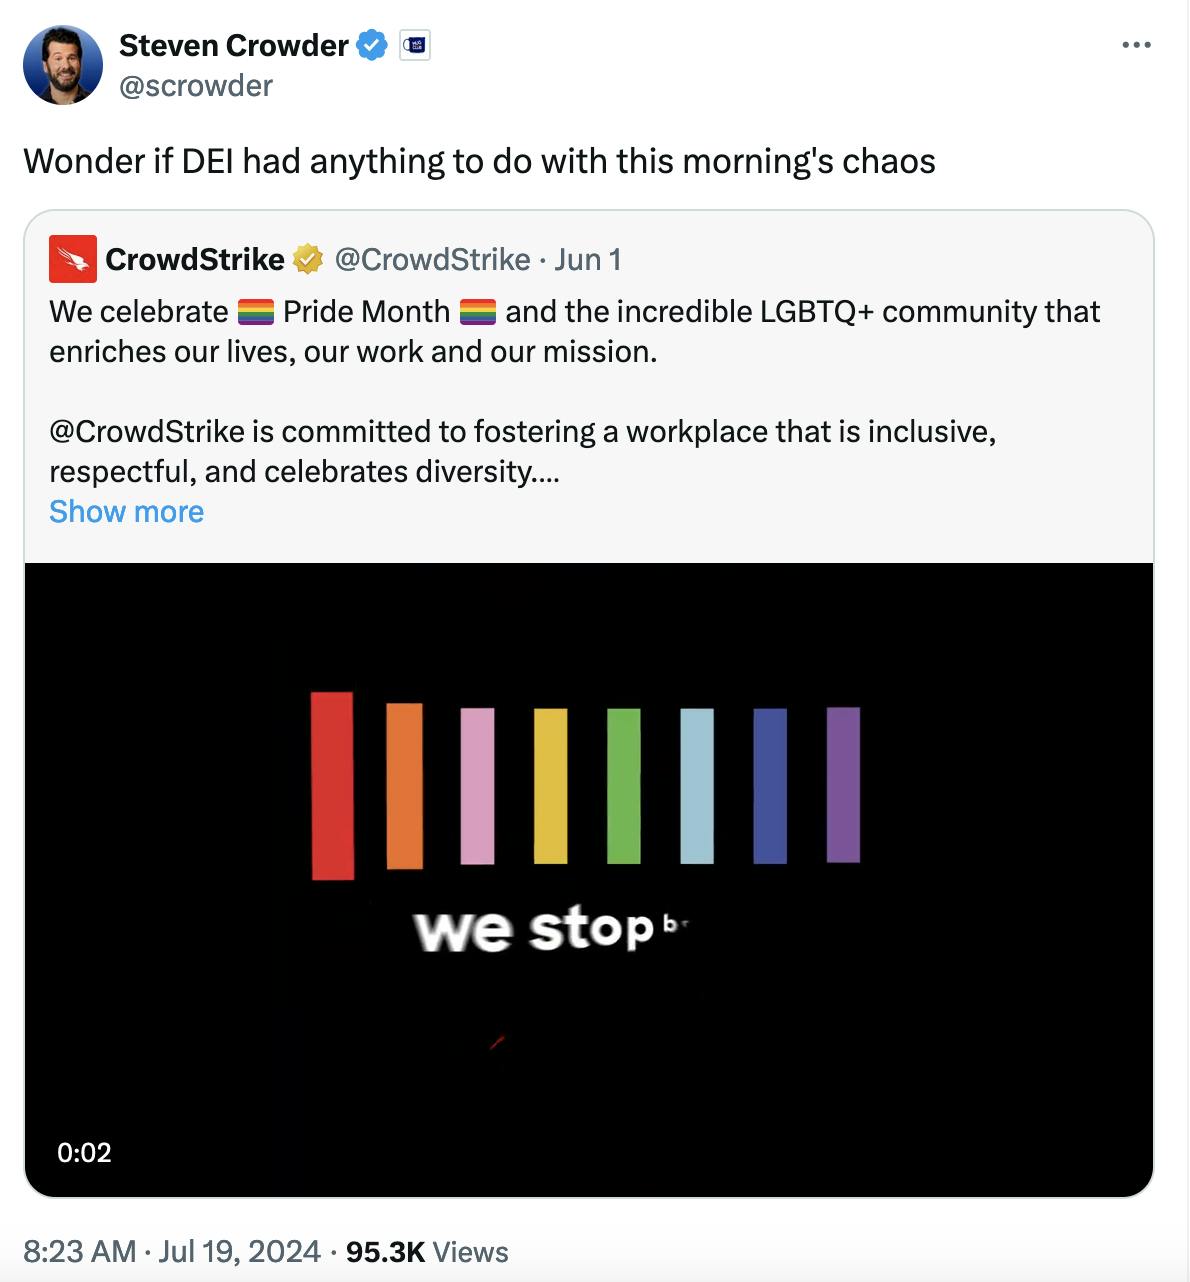 Twitter screenshot Steven Crowder @scrowder: Wonder if DEI had anything to do with this morning's chaos With a screenshot from a Crowdstrike tweet from June 1: We celebrate ????️‍???? Pride Month ????️‍???? and the incredible LGBTQ+ community that enriches our lives, our work and our mission. @CrowdStrike is committed to fostering a workplace that is inclusive, respectful, and celebrates diversity. We proudly stop breaches, together.